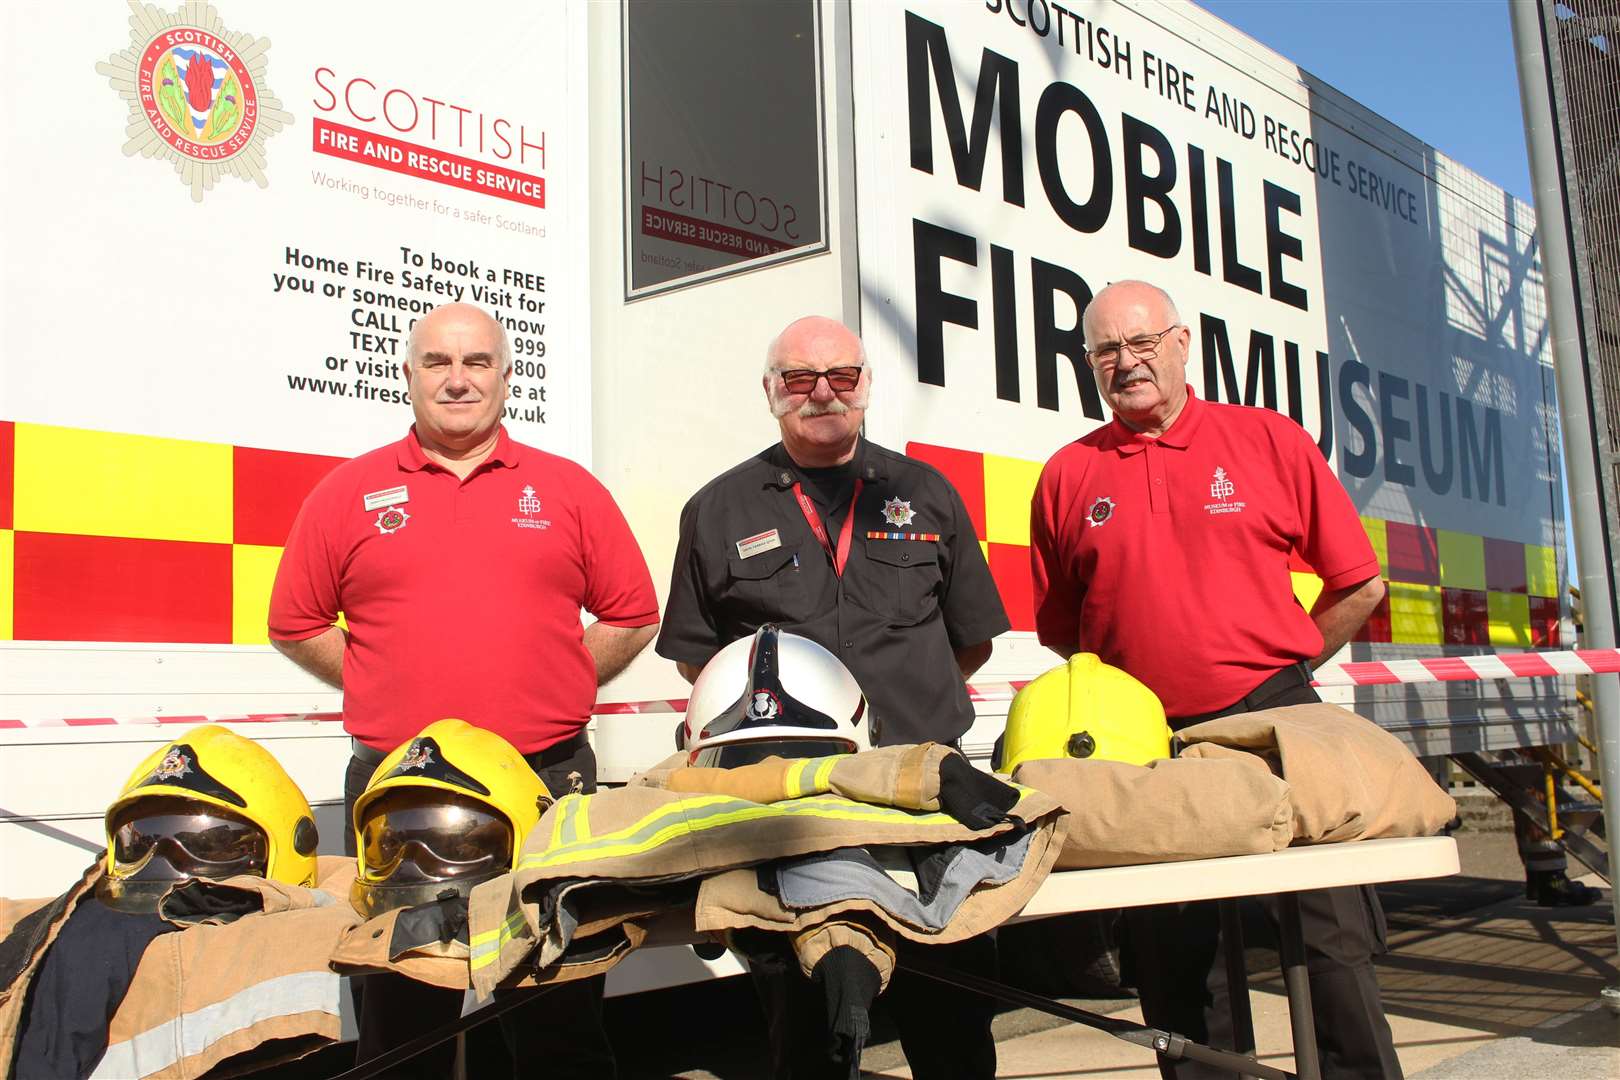 From left: Jimmy McDonald, Dave Farries and Keith Richardson brought the SFRS Mobile Museum to the Wick event. Picture: Alan Hendry